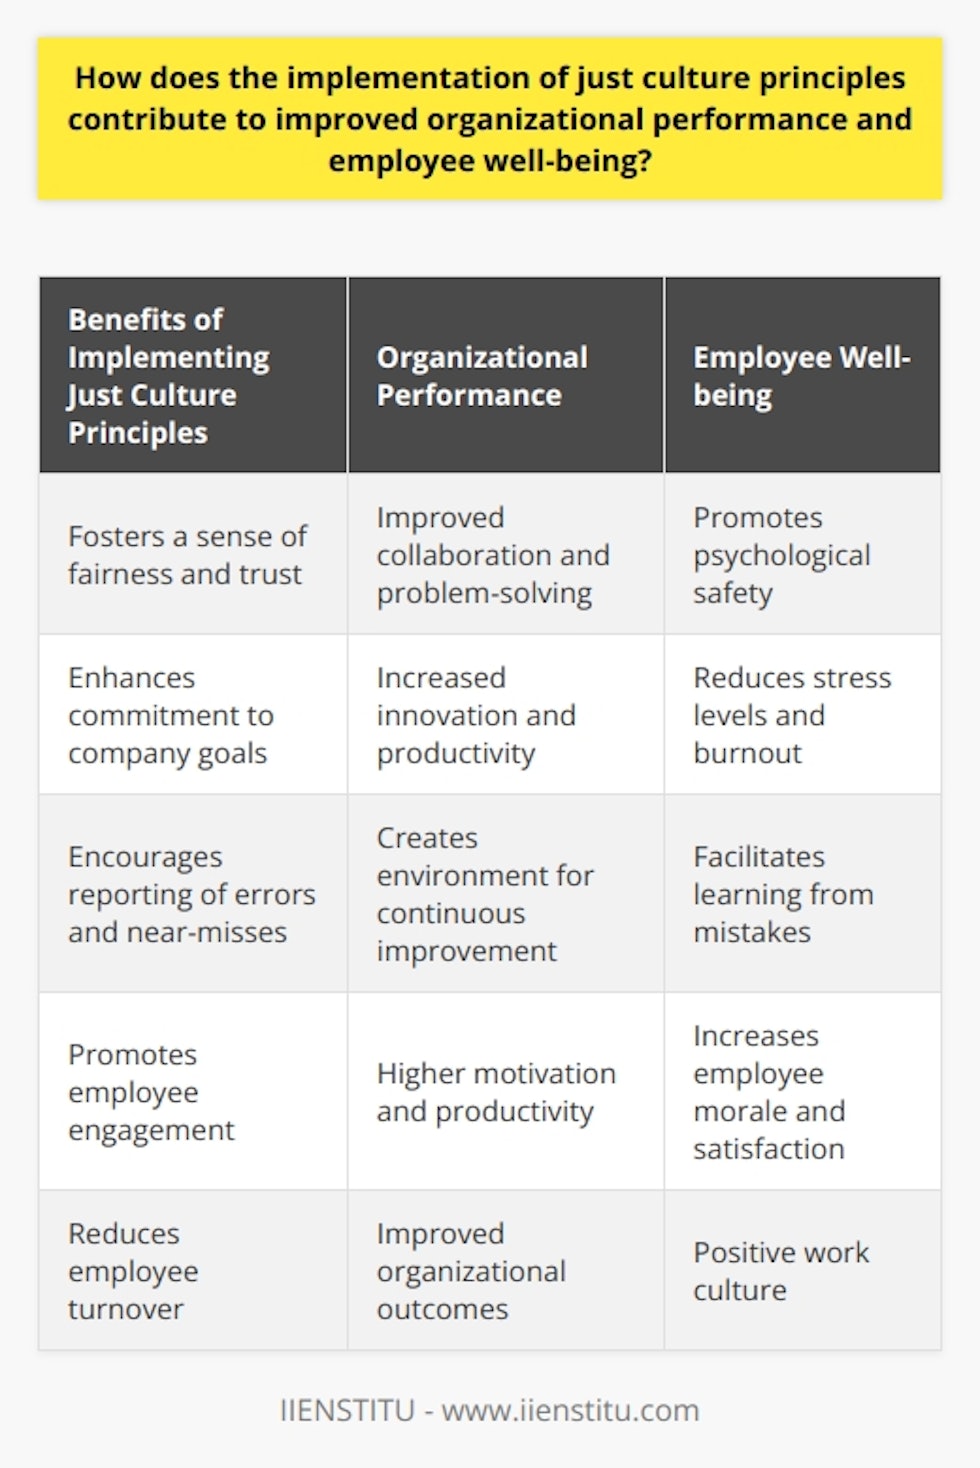 The concept of just culture principles stems from the belief that individuals should be held accountable for their actions in a fair and non-punitive manner. When organizations adopt these principles, they create an environment where employees feel safe to speak up, take accountability for their mistakes, and learn from them. This culture of fairness and trust has several benefits on organizational performance and employee well-being.Firstly, the implementation of just culture principles fosters a sense of fairness and trust among employees. This leads to improved collaboration and problem-solving within teams, resulting in increased innovation and productivity. When employees trust that their organization will handle issues fairly, they become more committed to achieving the company's goals, which ultimately enhances overall performance.Secondly, just culture principles have a direct impact on employee well-being. A just work environment promotes psychological safety, enabling individuals to openly discuss errors and learn from them without fear of punishment or blame. This reduces stress levels and burnout as employees are not constantly anxious about the repercussions of making mistakes. Consequently, employee well-being is improved, contributing to a positive work culture.Furthermore, the implementation of just culture principles encourages employees to report errors and near-misses. This willingness to report issues creates an environment of continuous improvement, enabling the organization to learn from mistakes and make necessary changes to improve processes and prevent future incidents. This leads to a more efficient and effective workplace, positively impacting organizational performance.Moreover, just culture principles promote employee engagement. When employees are treated fairly and with respect, they feel valued and invested in the organization's success. This, in turn, increases their level of motivation, leading to higher productivity and directly contributing to the achievement of organizational goals. Additionally, improved employee morale and satisfaction tend to reduce employee turnover, which positively impacts the organization's bottom line.In summary, implementing just culture principles is crucial for enhancing organizational performance and employee well-being. By creating an environment of trust, promoting employee engagement, encouraging error reporting, and facilitating continuous improvement, organizations can develop a positive, efficient, and motivated workforce. This, in turn, leads to improved outcomes, benefiting both the organization and its employees.